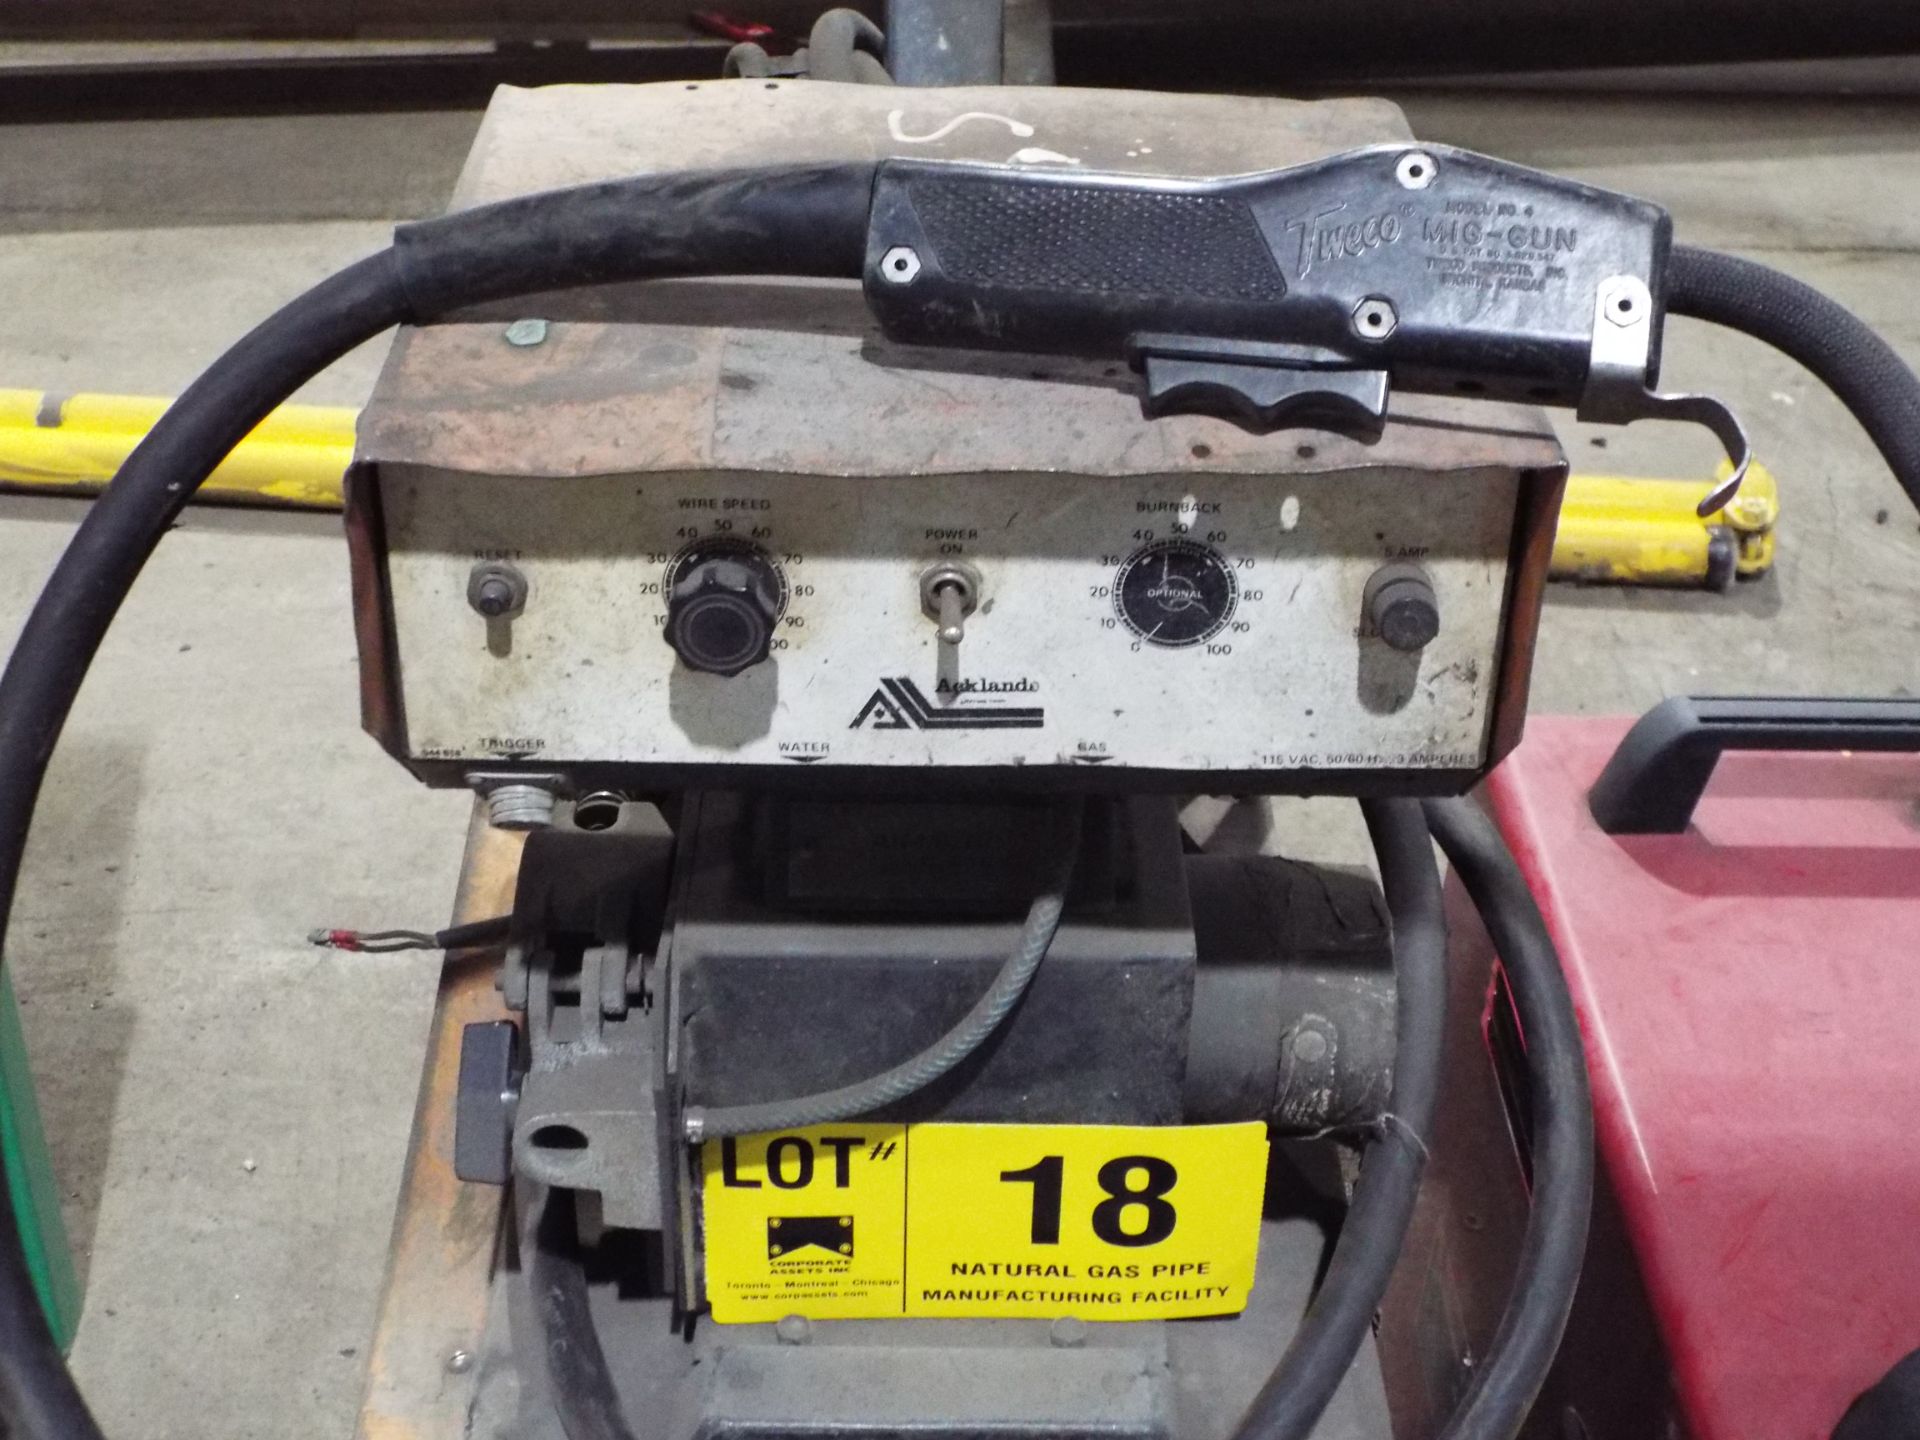 ACKLANDS N-200 DC/CP WELDER WITH ACKLANDS WIRE FEED S/N: N/A - Image 2 of 2